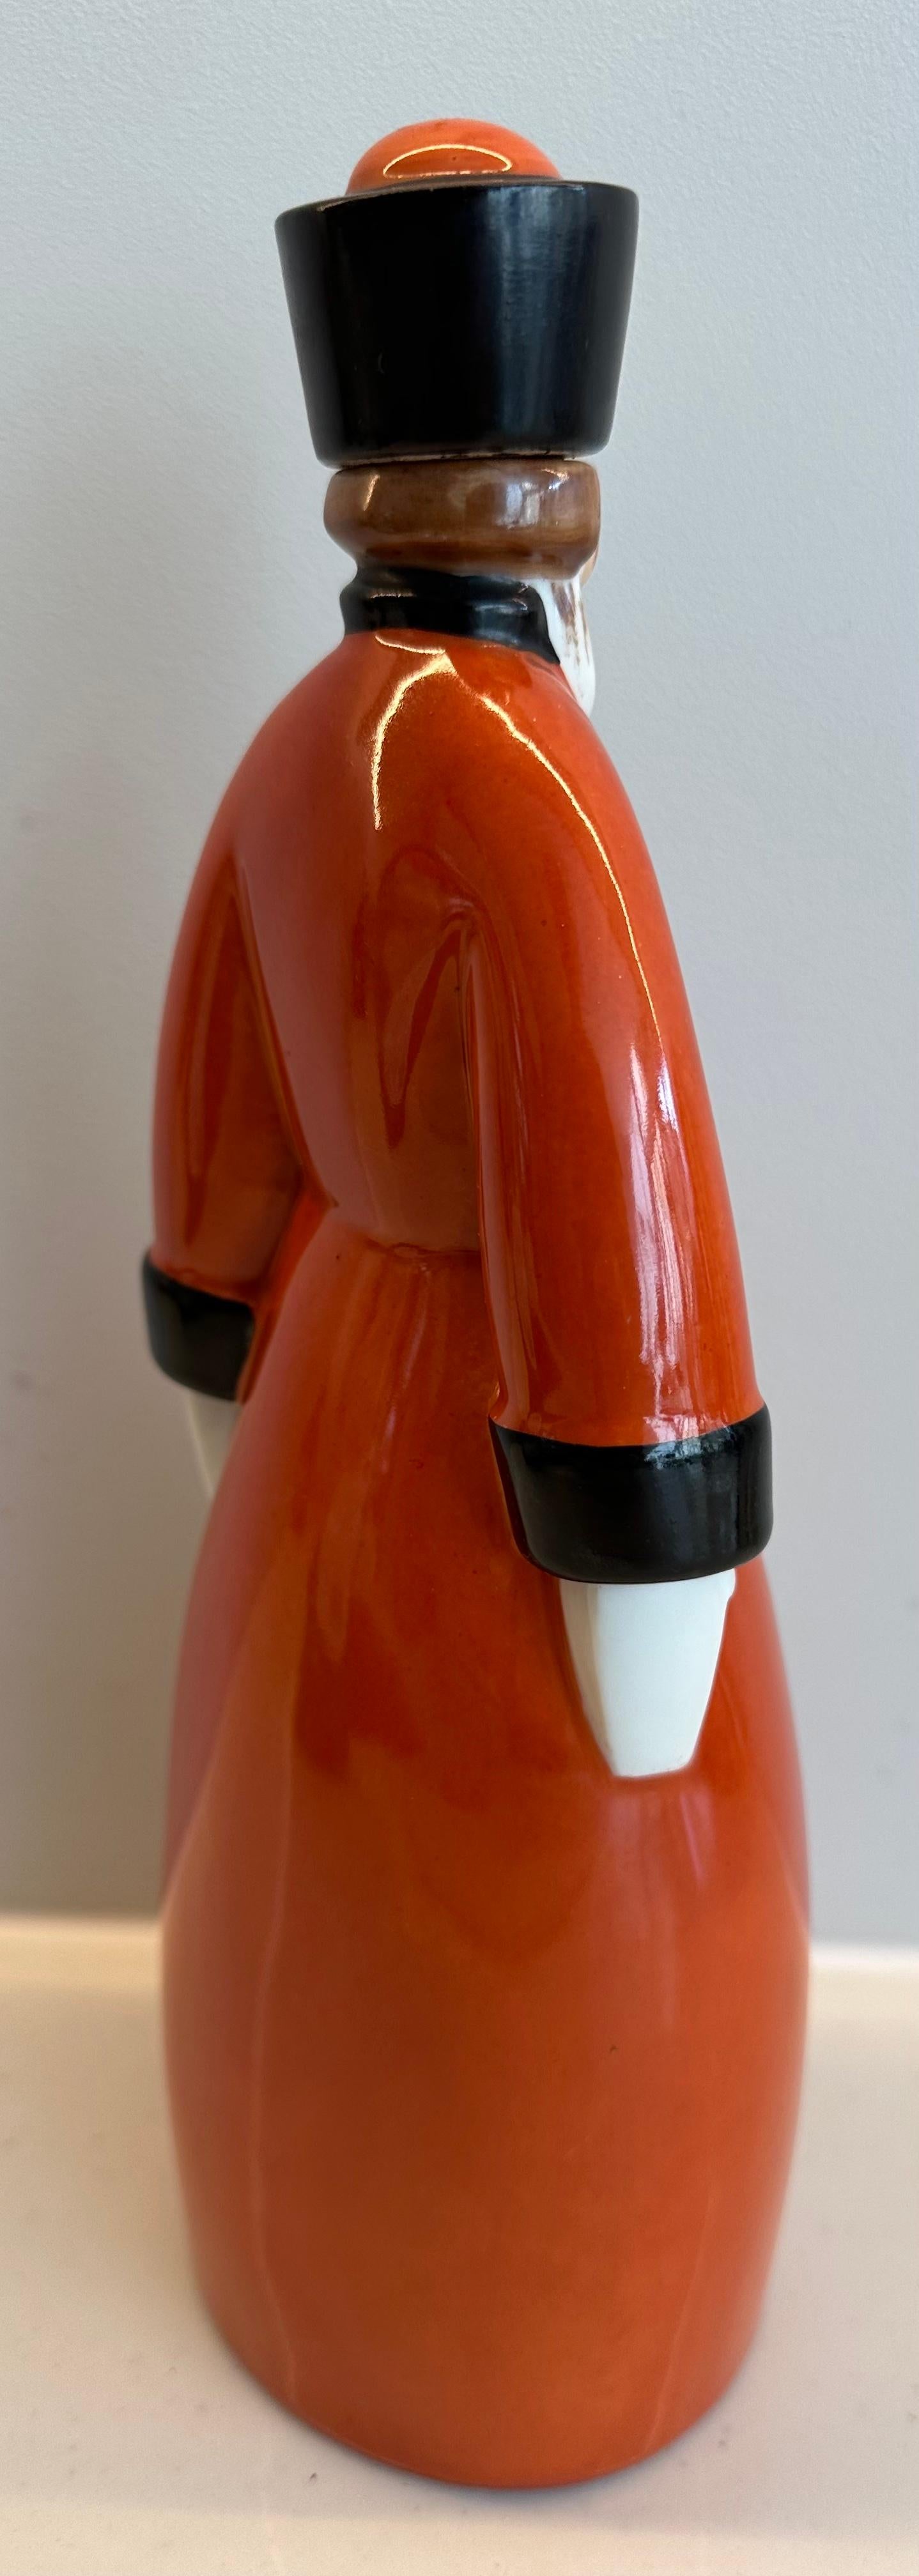 Art Deco 1930s French “Curacao” Figural Russian Soldier Flask by Robj Paris For Sale 3